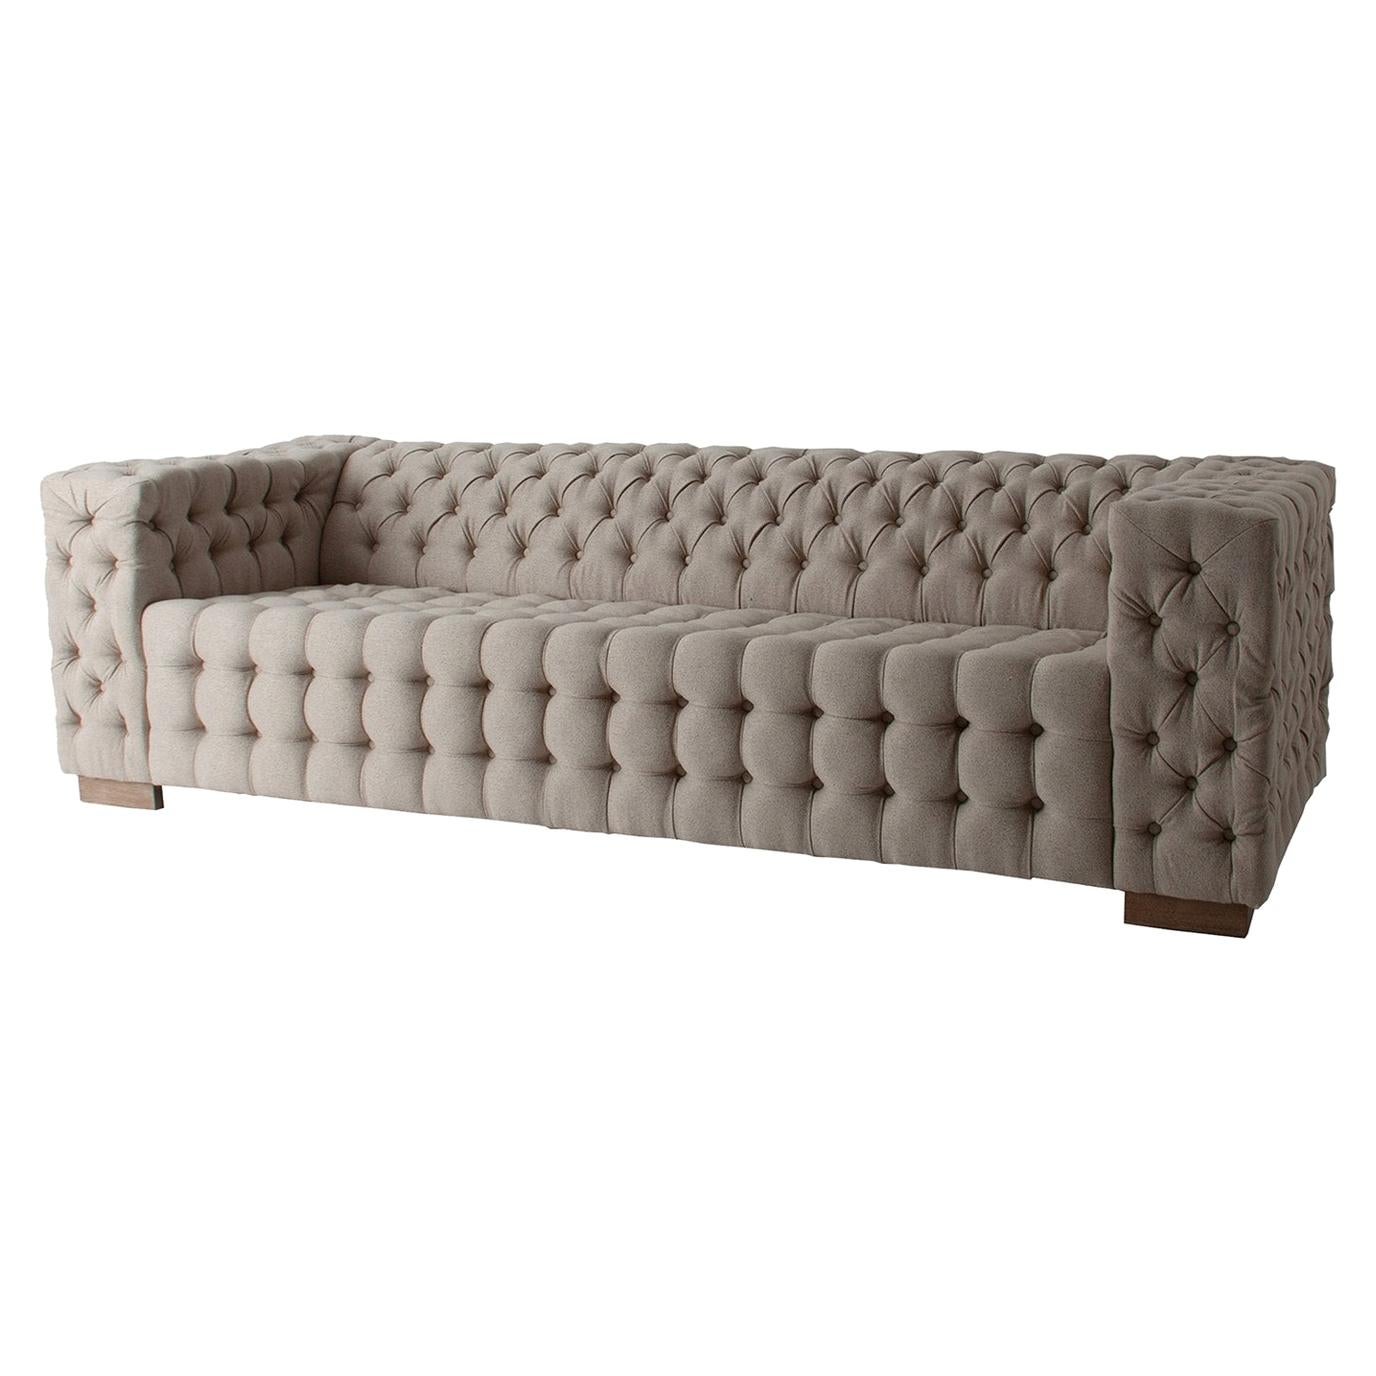 Beige Fabric and Wooden Feet Quilted Sofa